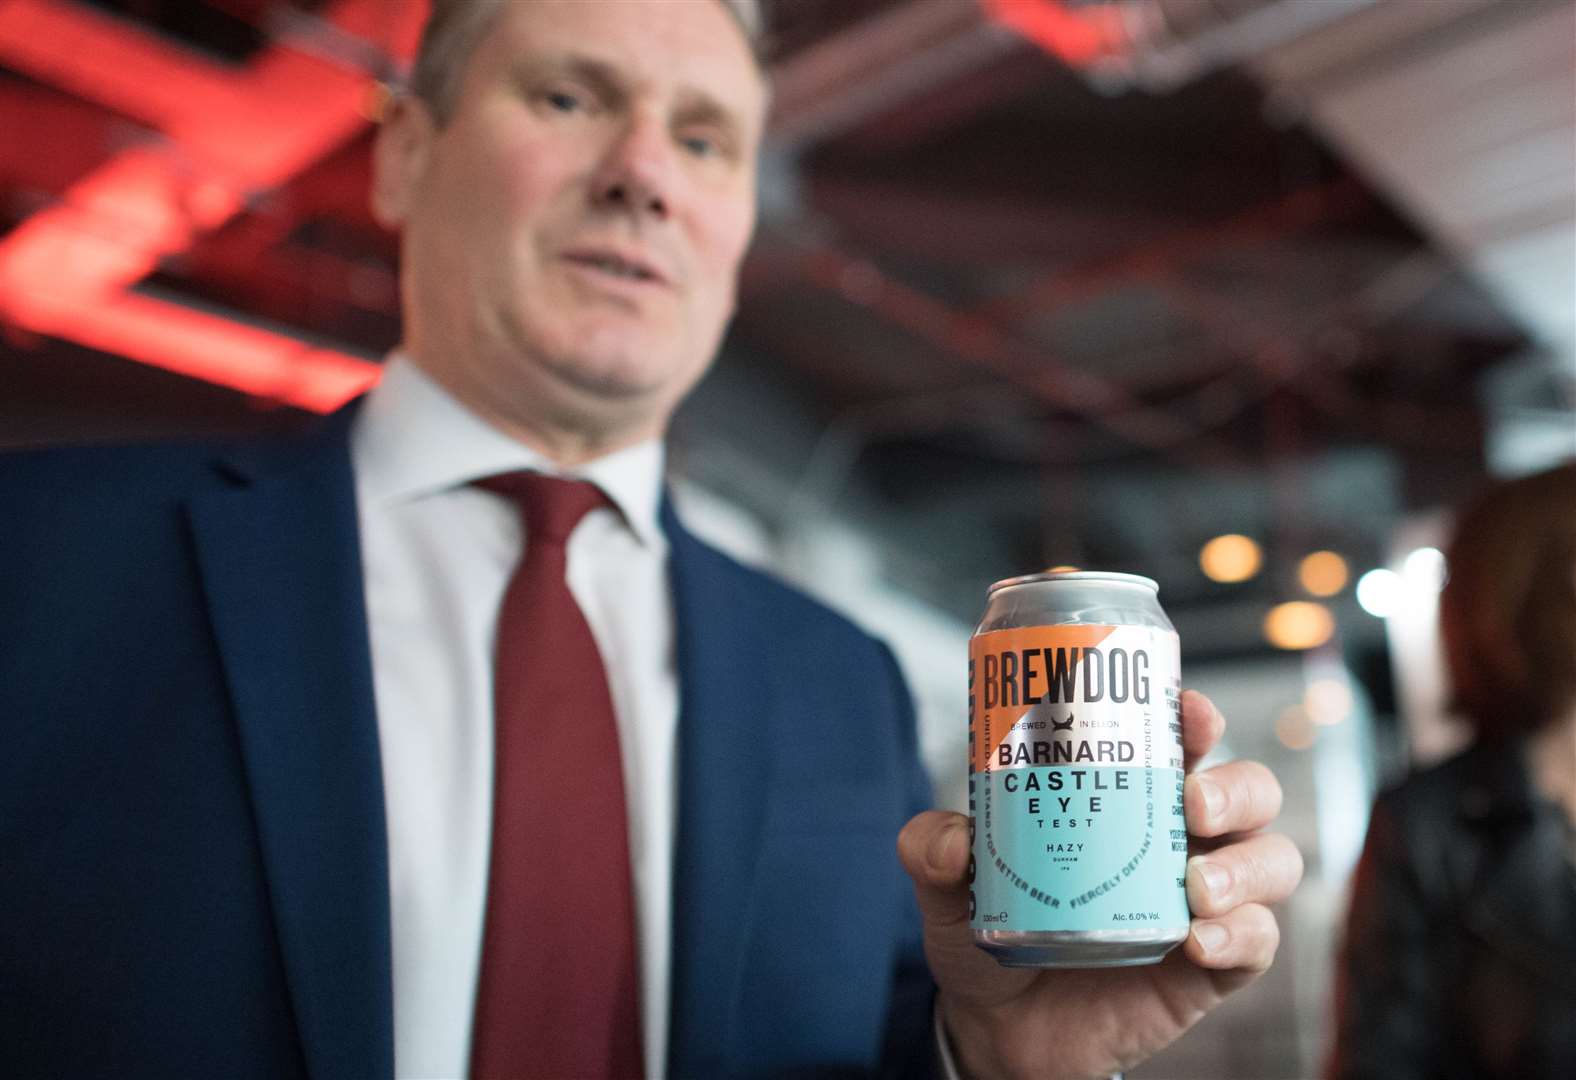 Labour leader Keir Starmer holding a can of ‘Barnard Castle Eye Test’ beer during a visit to the Brewdog Pub and Brewery in the City of London (Stefan Rousseau/PA)